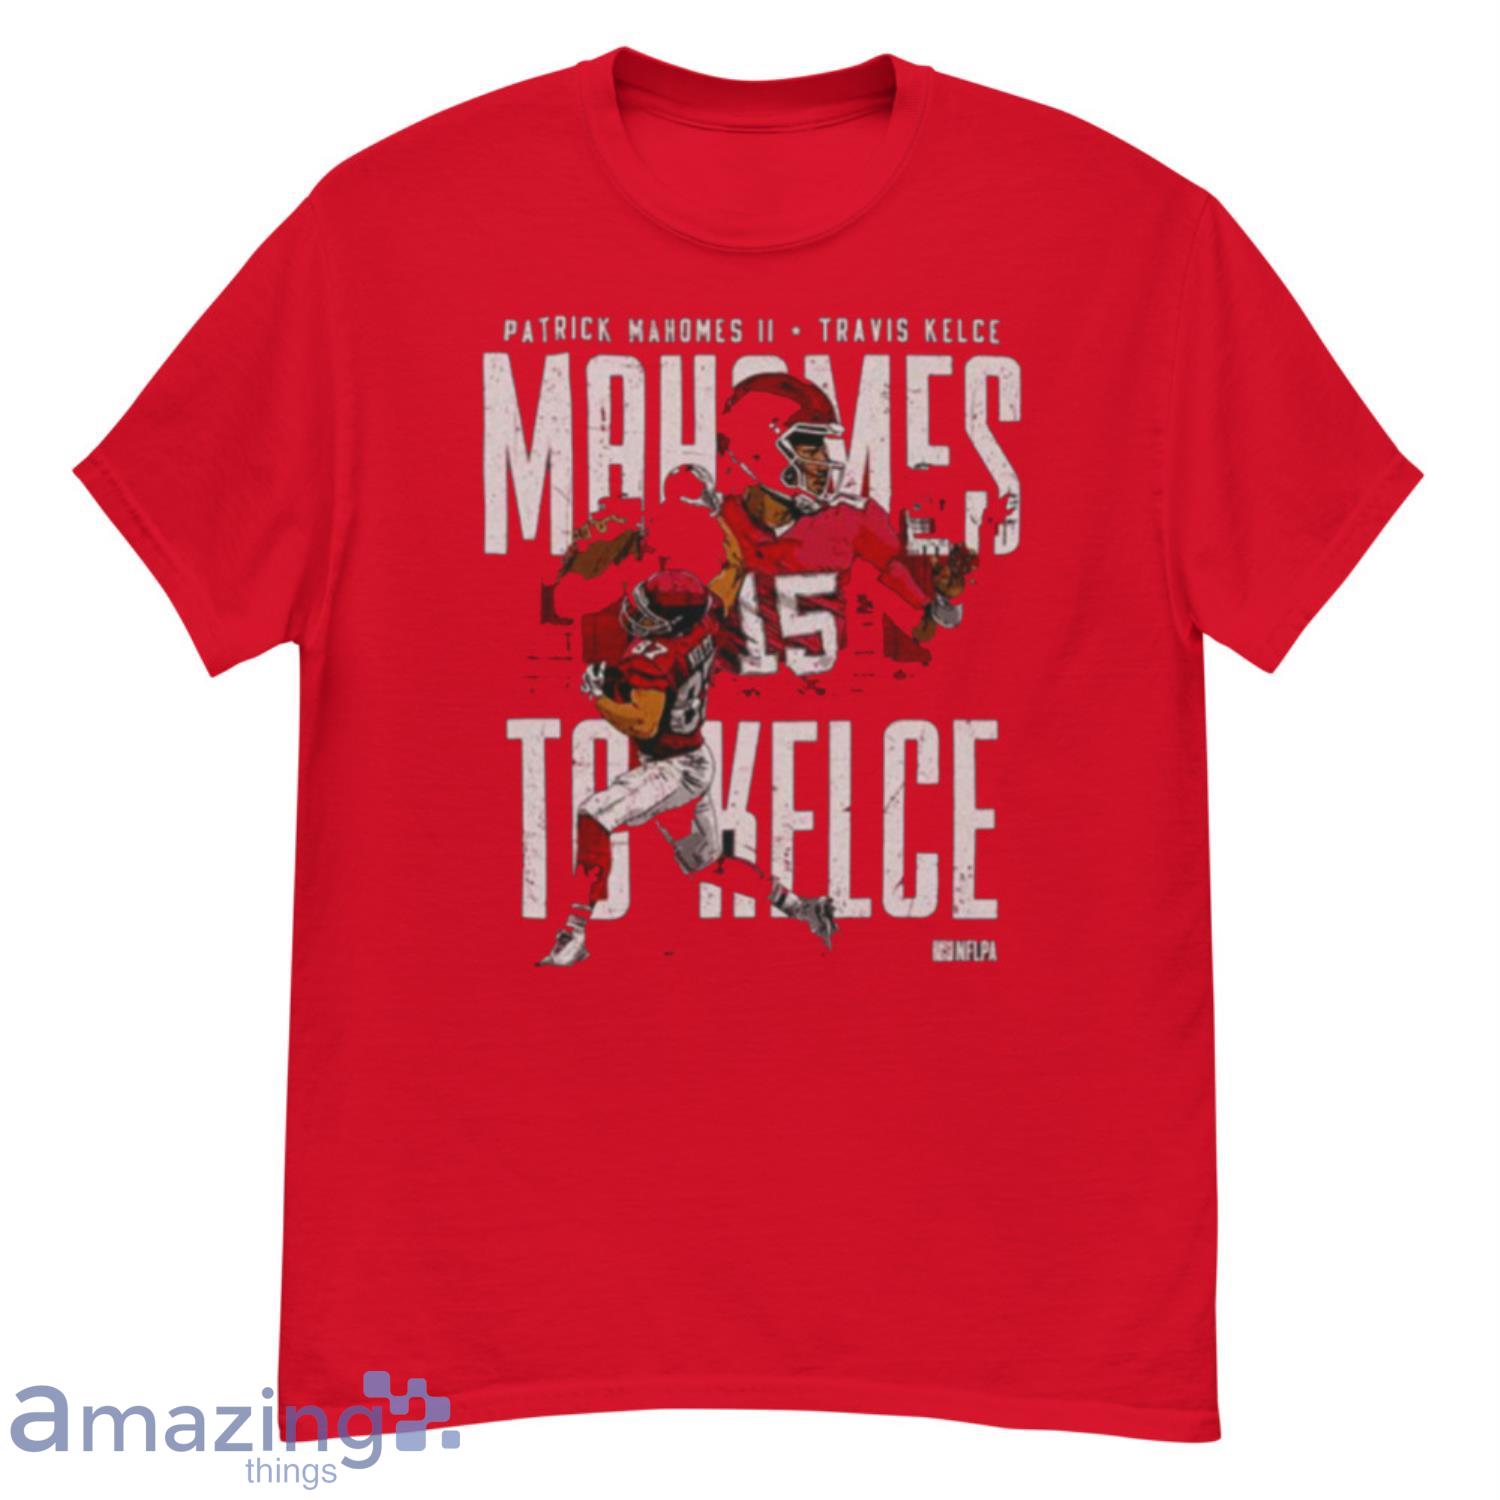 Shirt design request: Stylized version of Mahomes pouring Travis